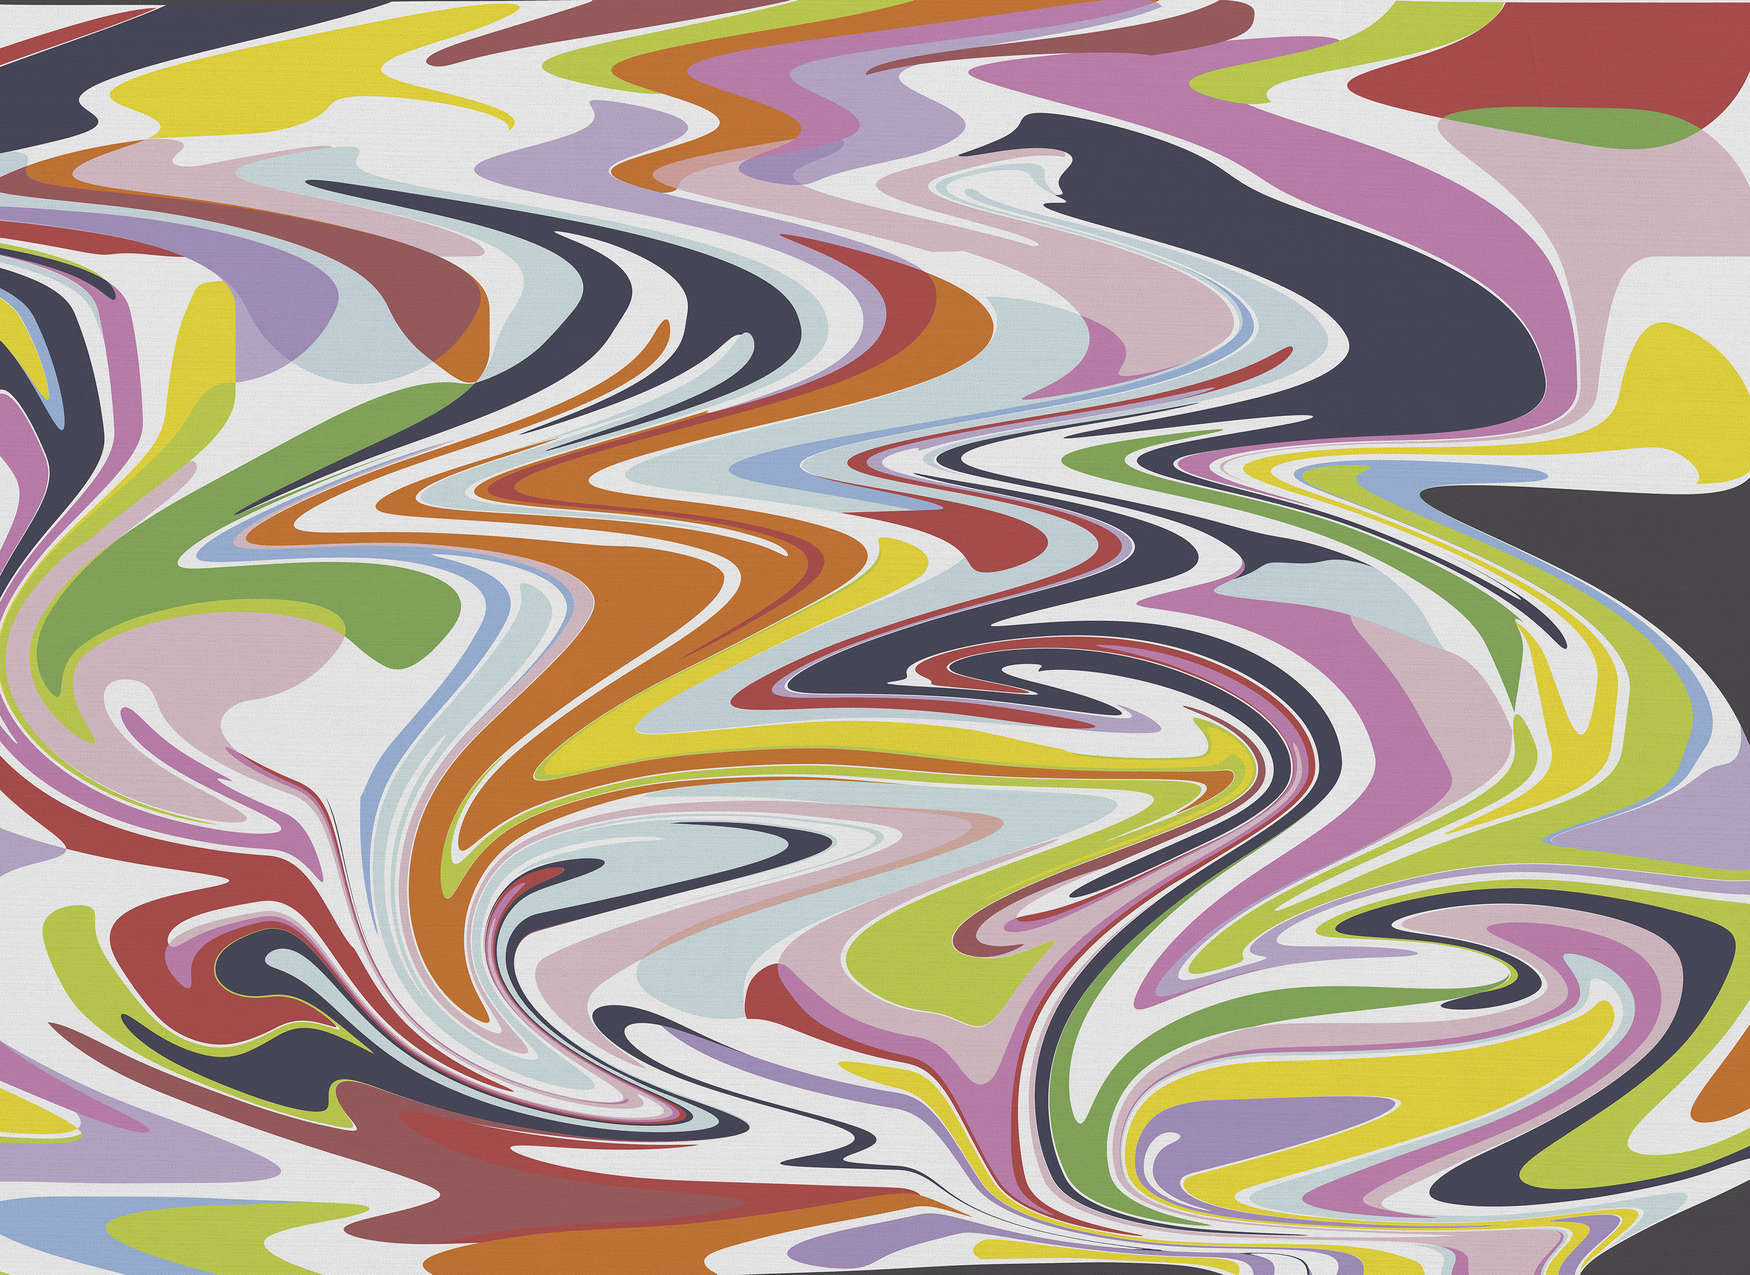             Photo wallpaper abstract colour mix multicoloured pattern - Multicoloured
        